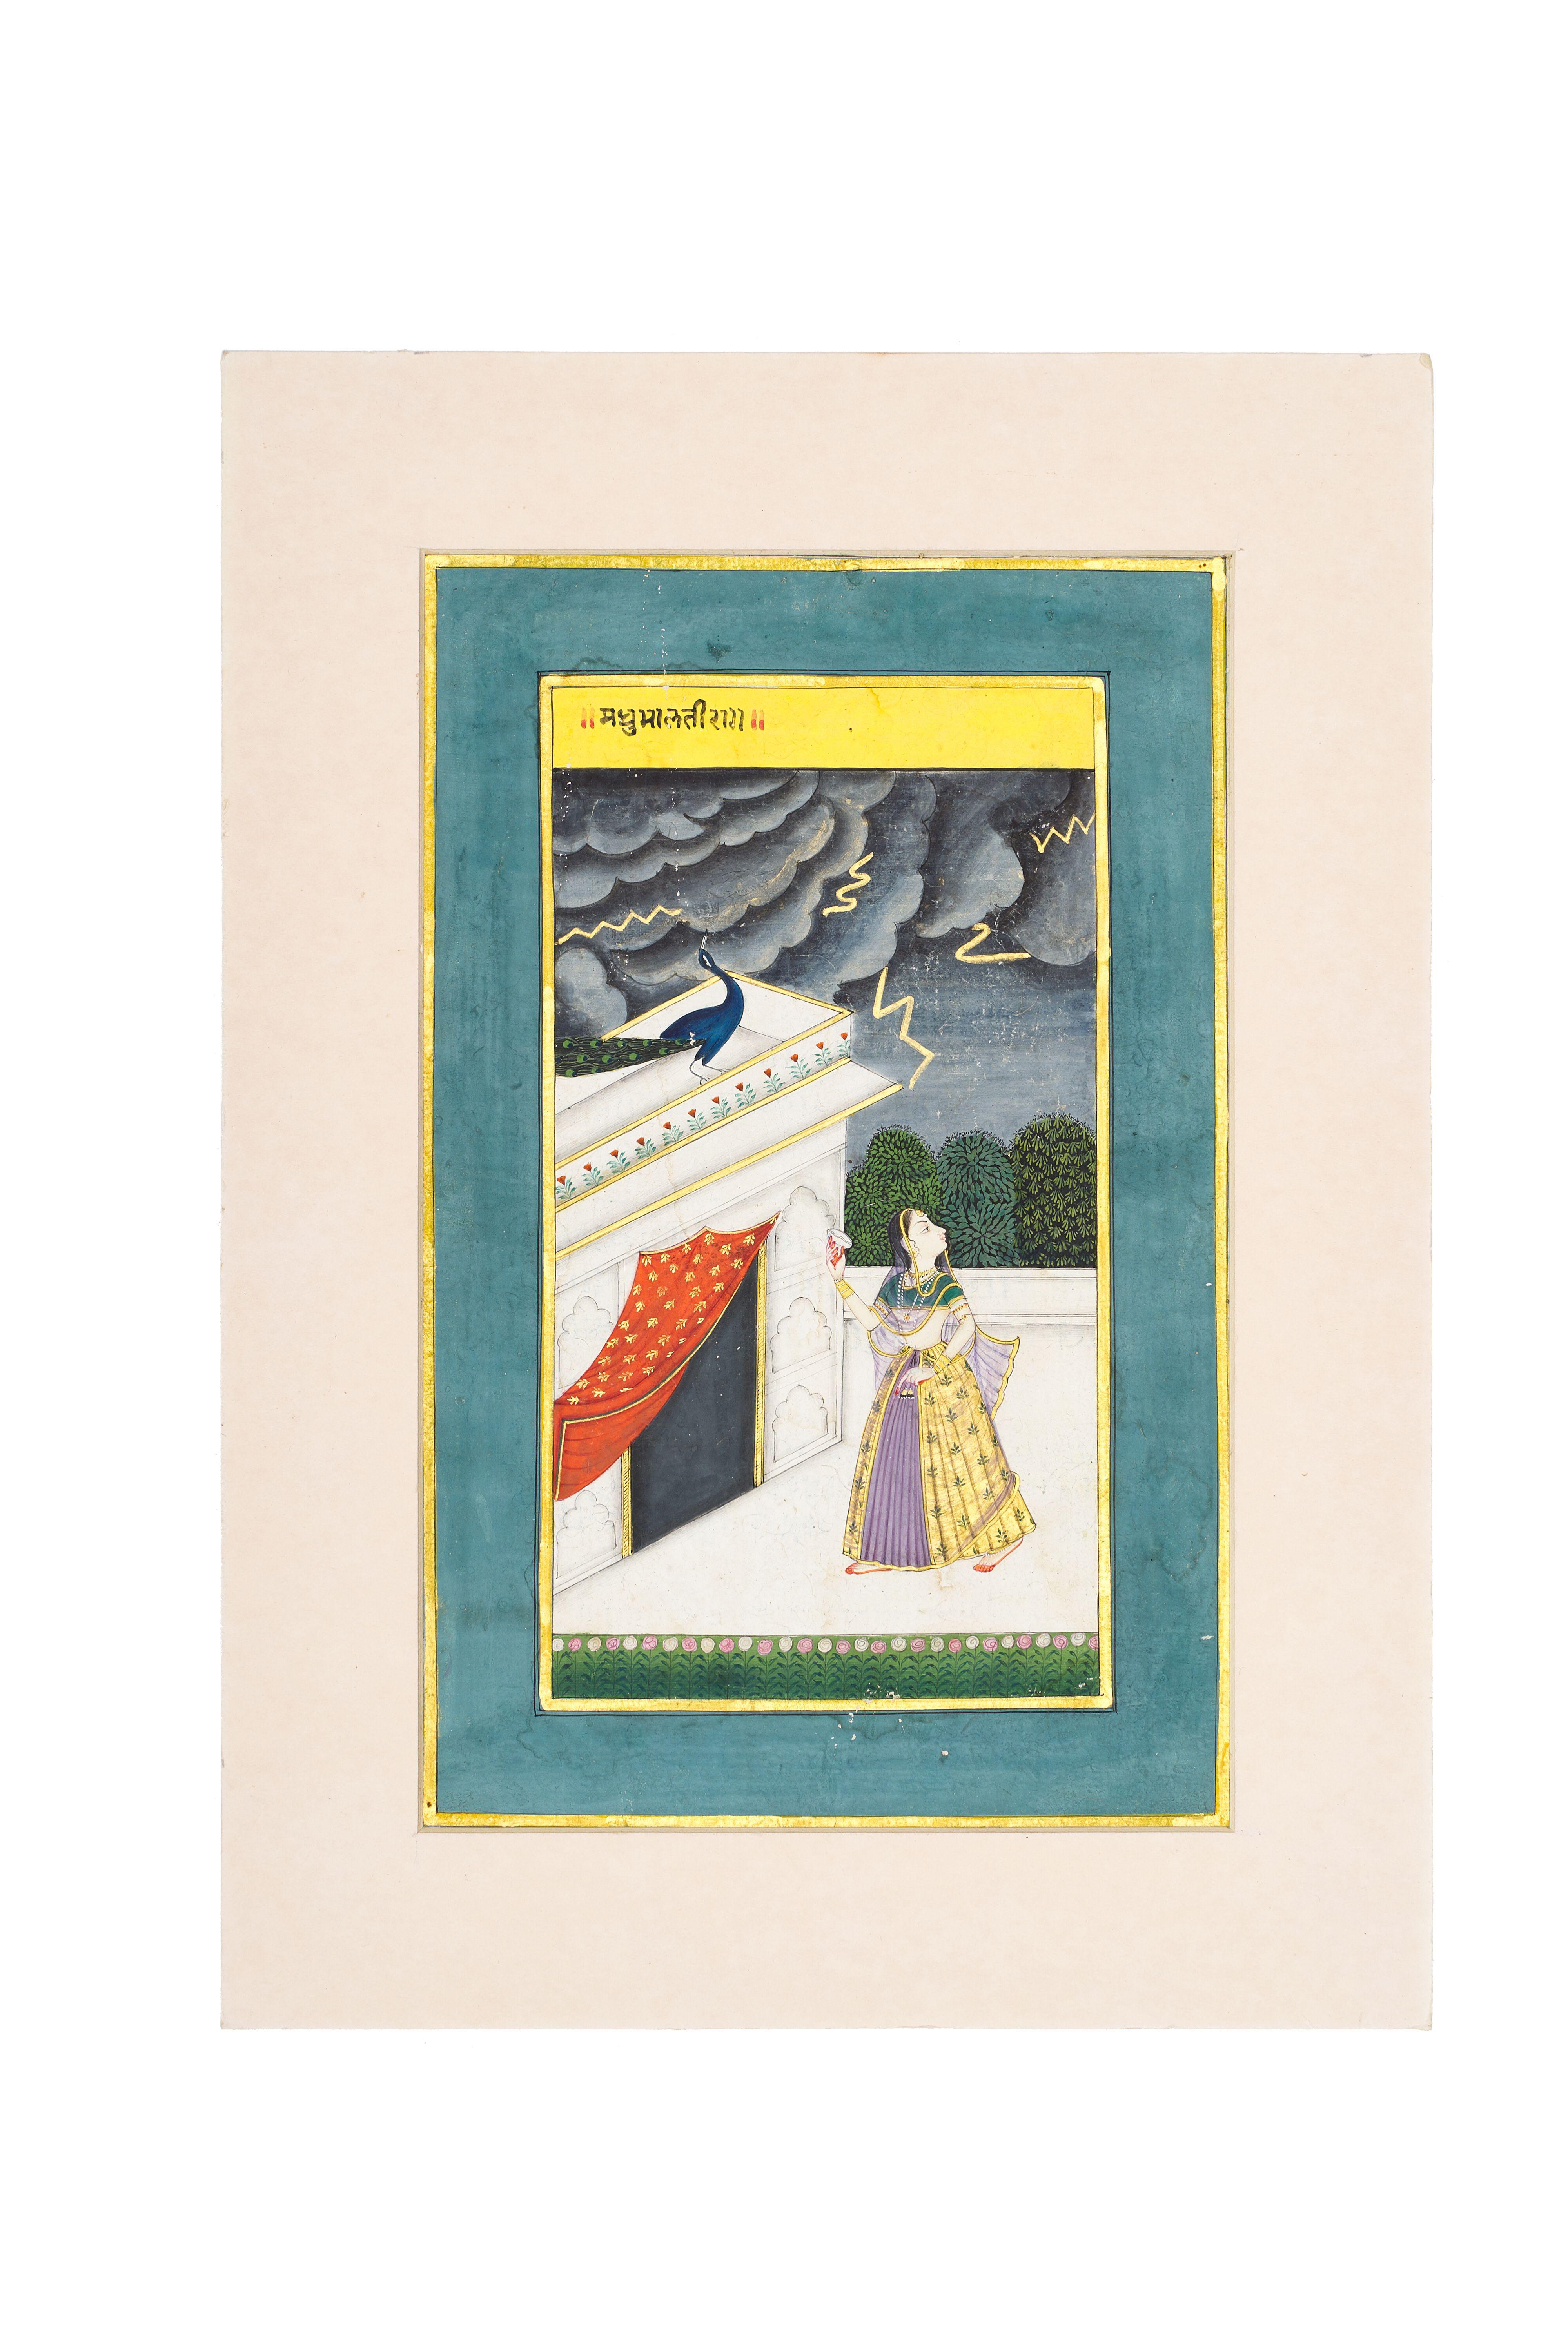 A 19TH CENTURY NIGHT SCENE INDIAN MINIATURE DEPICTING A LADY TAKING SHELTER FROM THUNDER